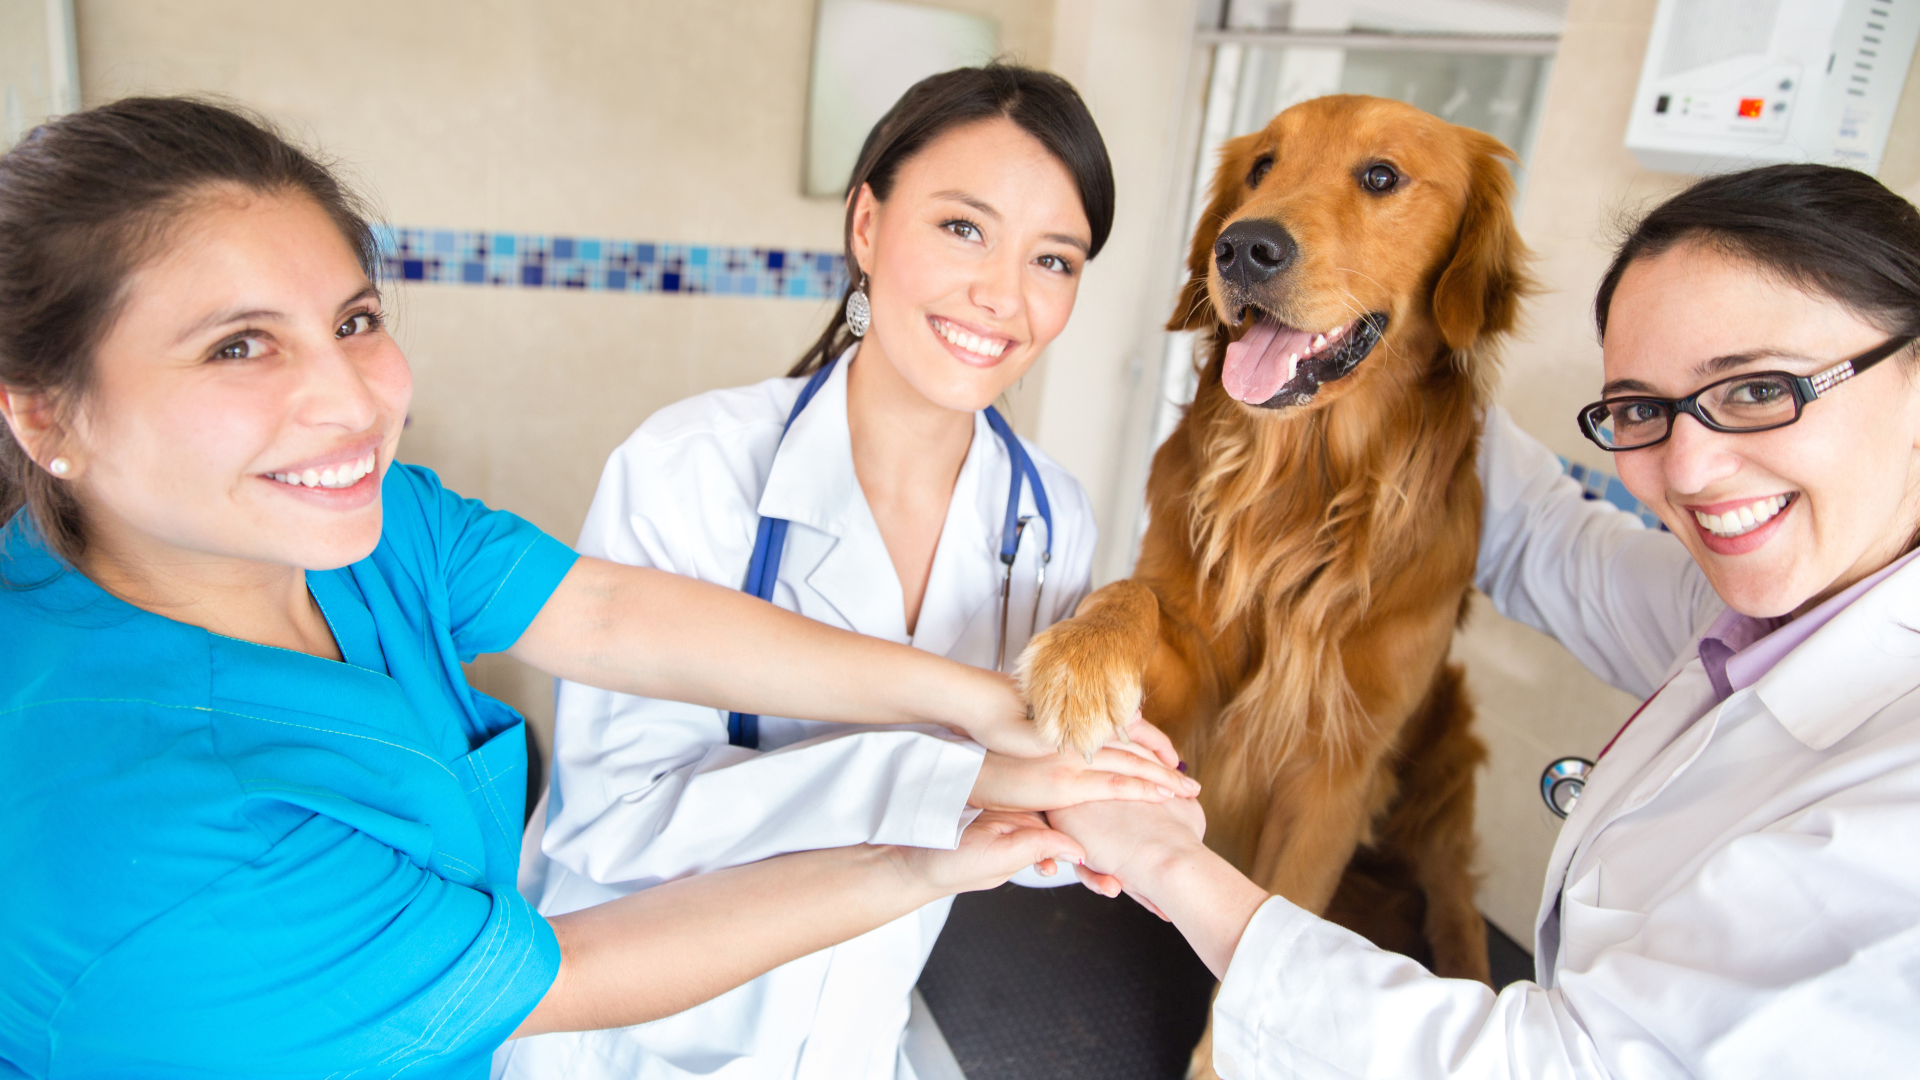 5 Steps to Maintaining Your Mental Health in the Veterinary Field